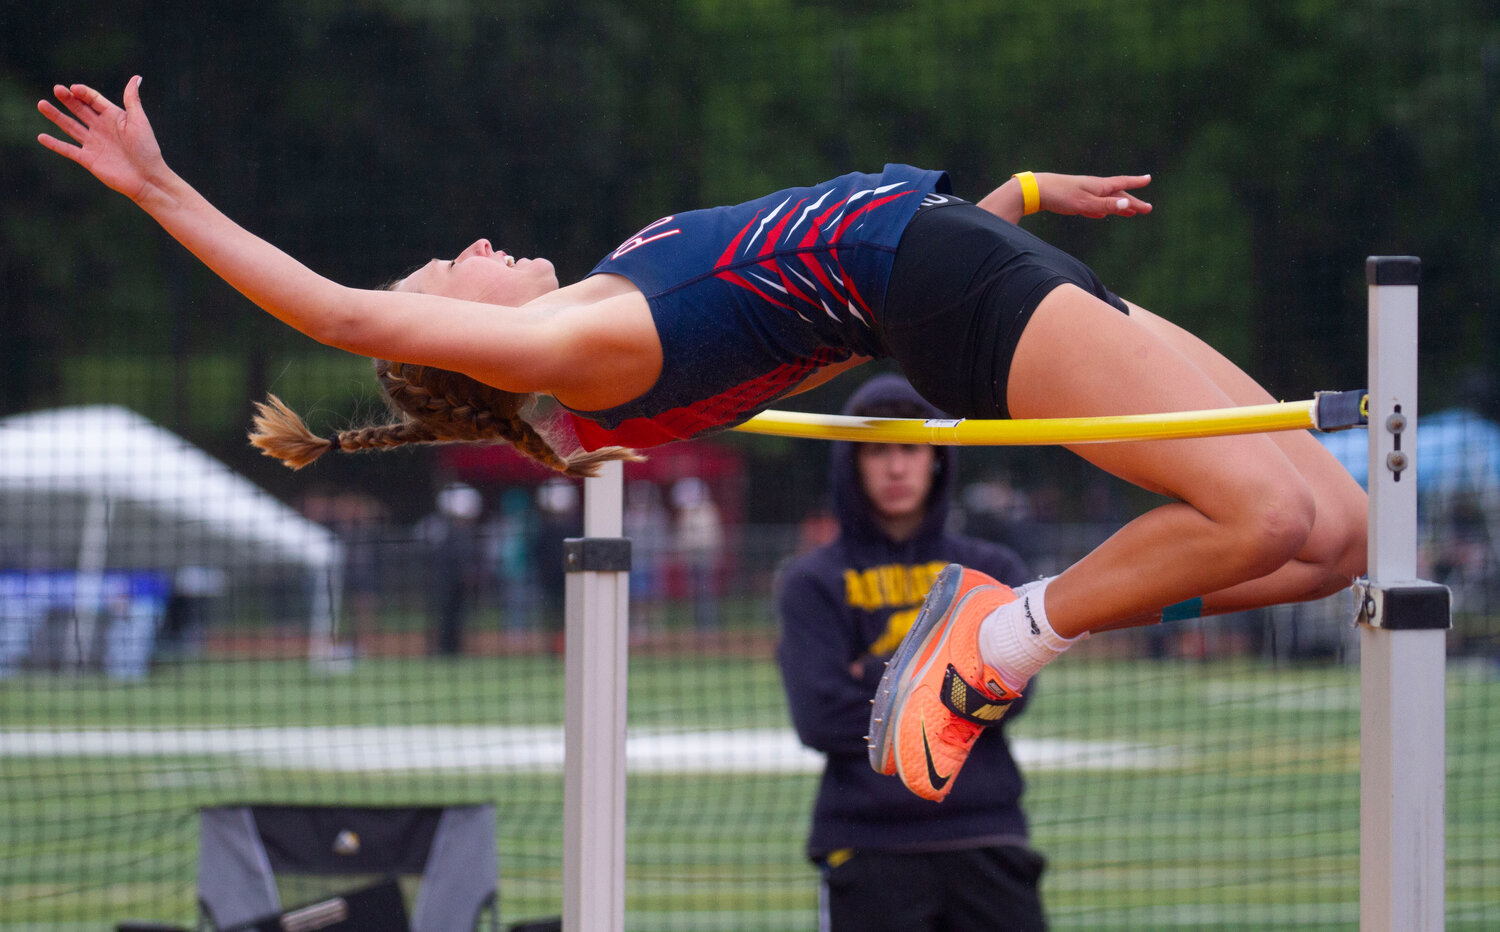 Portsmouth High senior Morgan Casey clears the bar at 5 feet, 2 inches to win the girls’ high jump event at Saturday’s Track and Field State Championships at Conley Stadium in Providence. She was the only first-place winner among the Patriots at the meet.